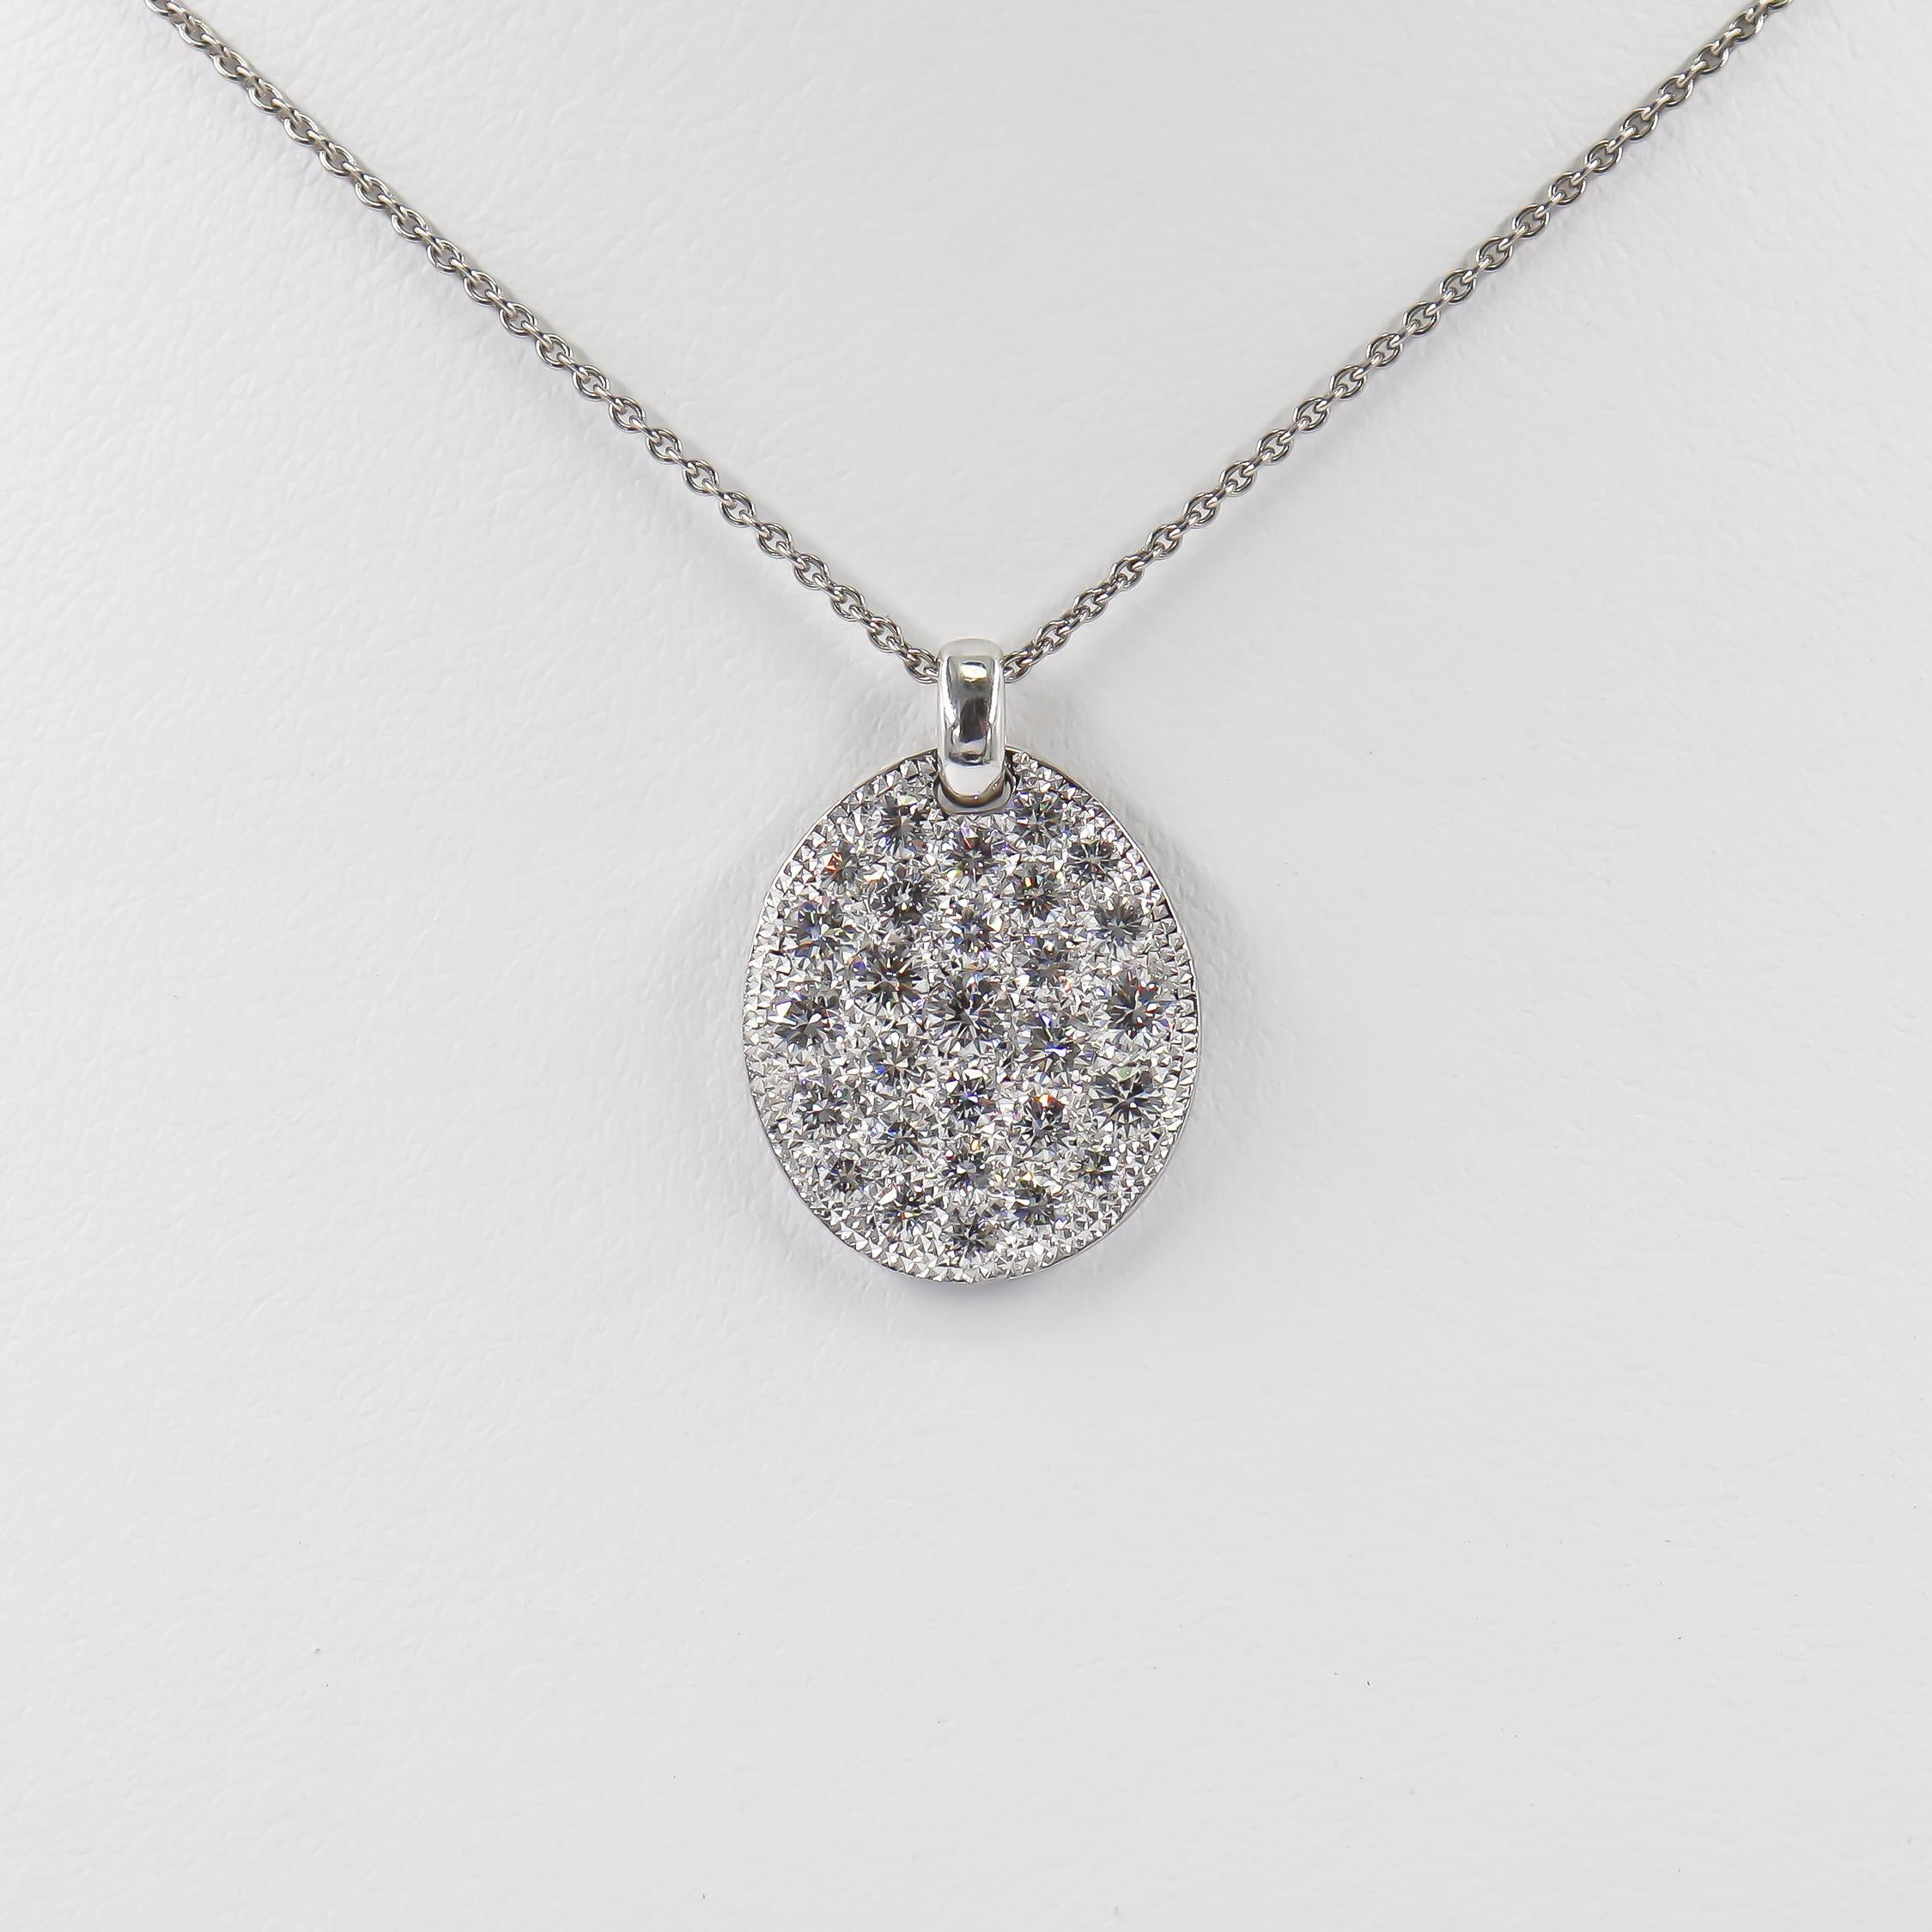 This incredible acquisition by the house of J. Birnbach features a signed De Beers pendant necklace from the esteemed Talisman collection. Set with 29 round brilliant cut diamonds of G color and VS+ clarity = 1.38 carat total weight, this design is